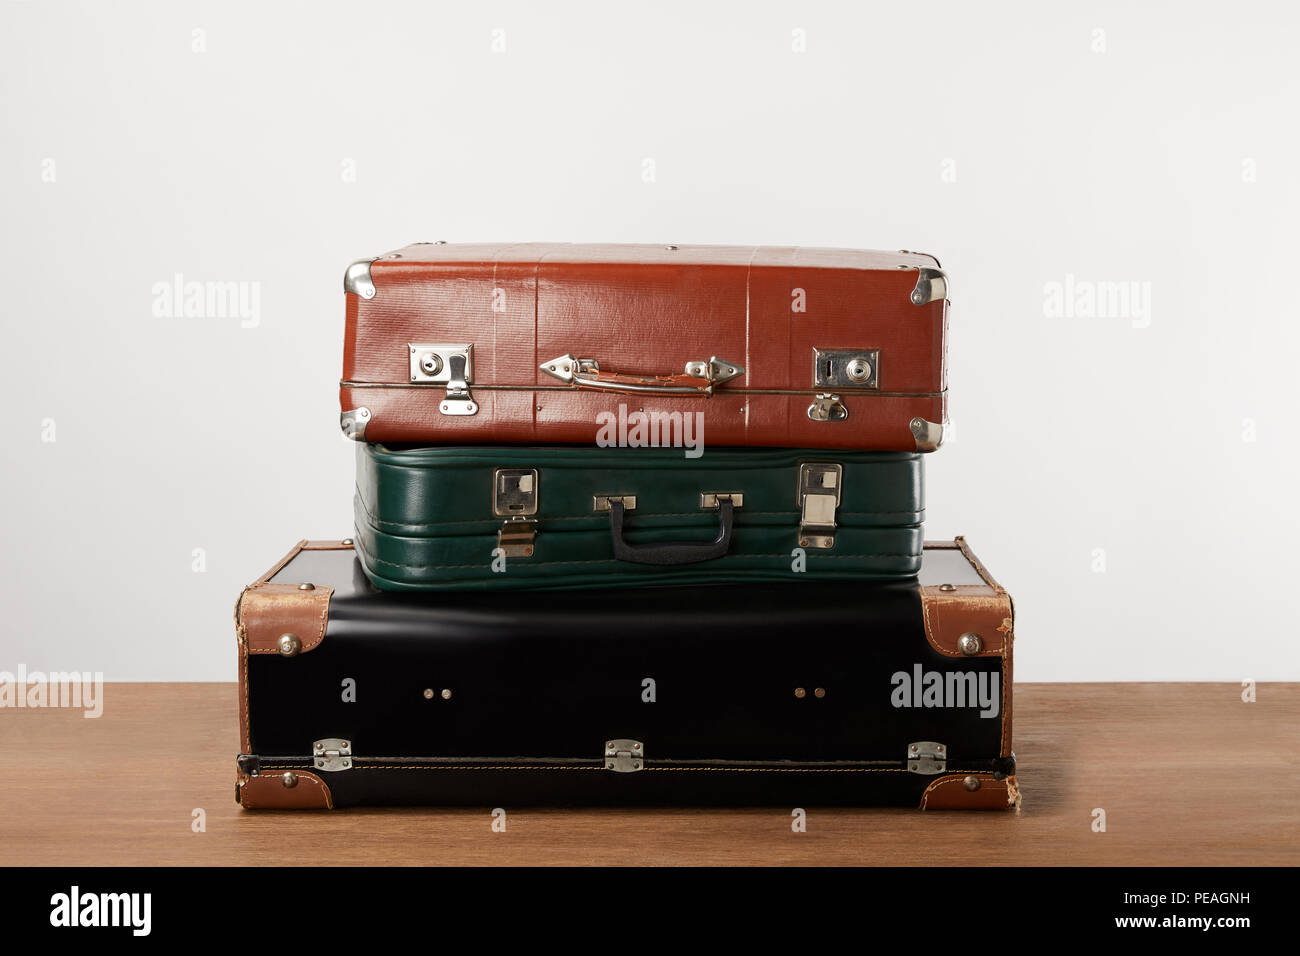 Home interior with two chairs and four Louis Vuitton trunks on the floor  Stock Photo - Alamy